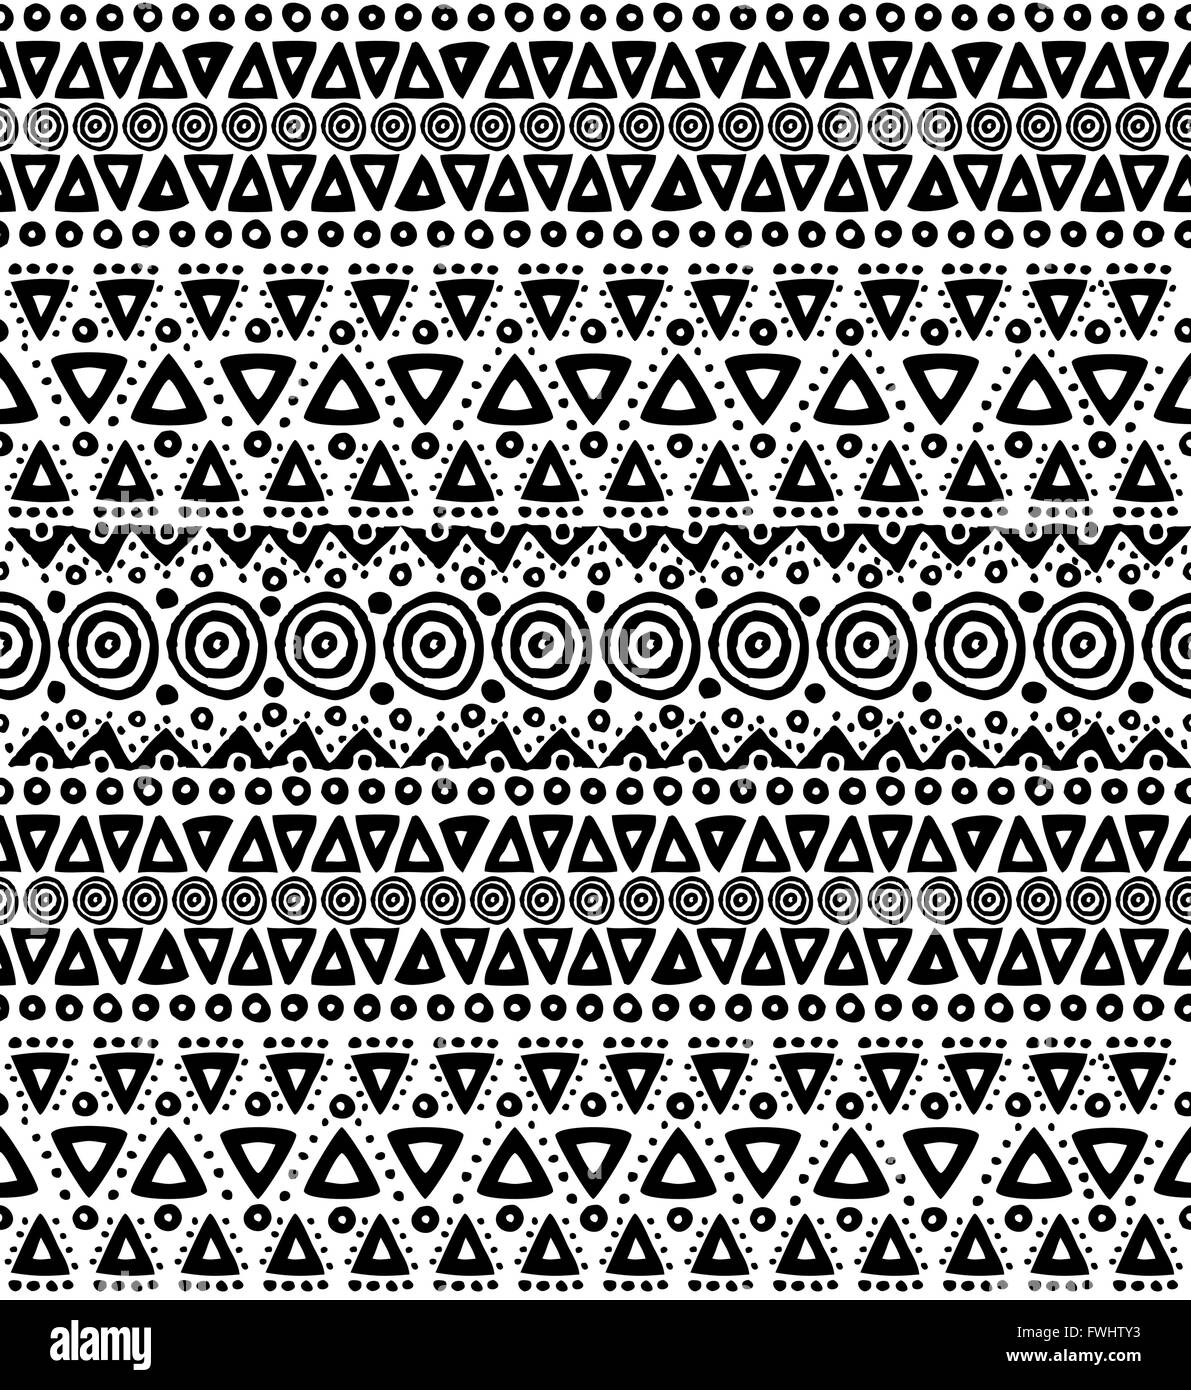 Boho seamless pattern in black and white colors with tribal stripes and handmade geometric shapes. EPS10 vector. Stock Vector